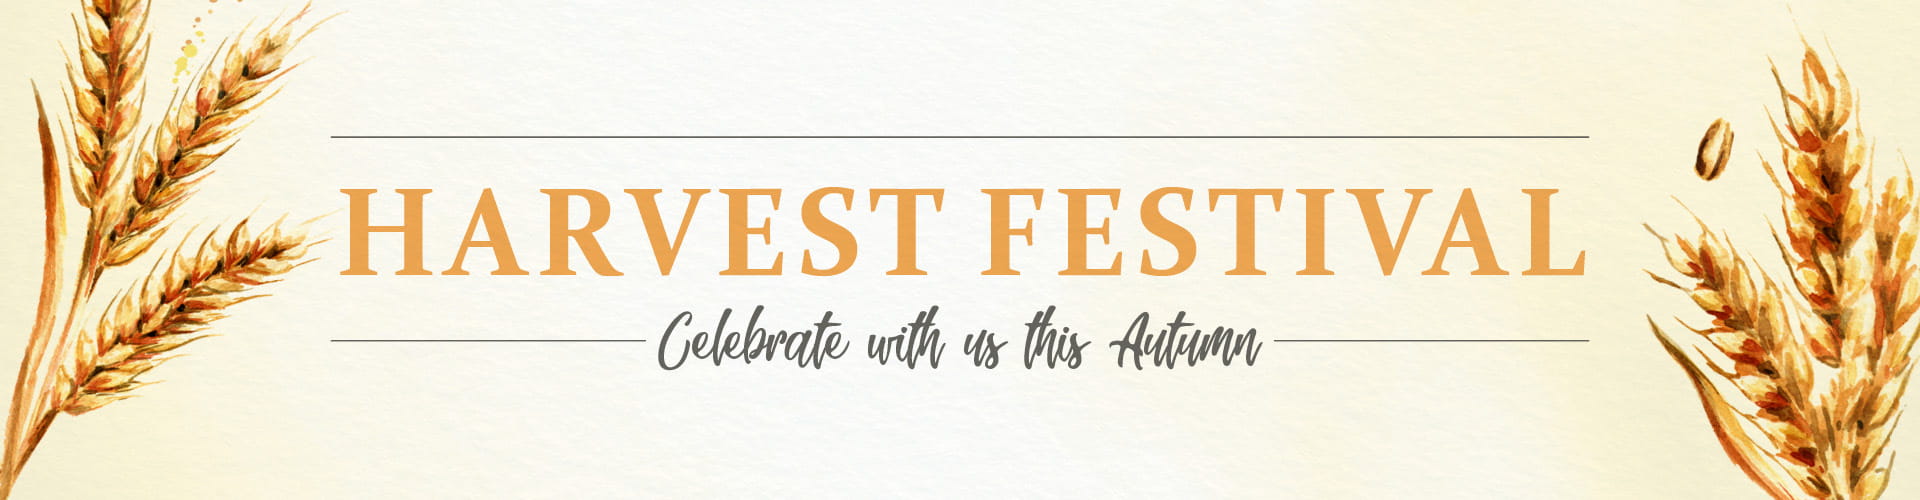 Harvest Festival - Celebrate with us this Autumn